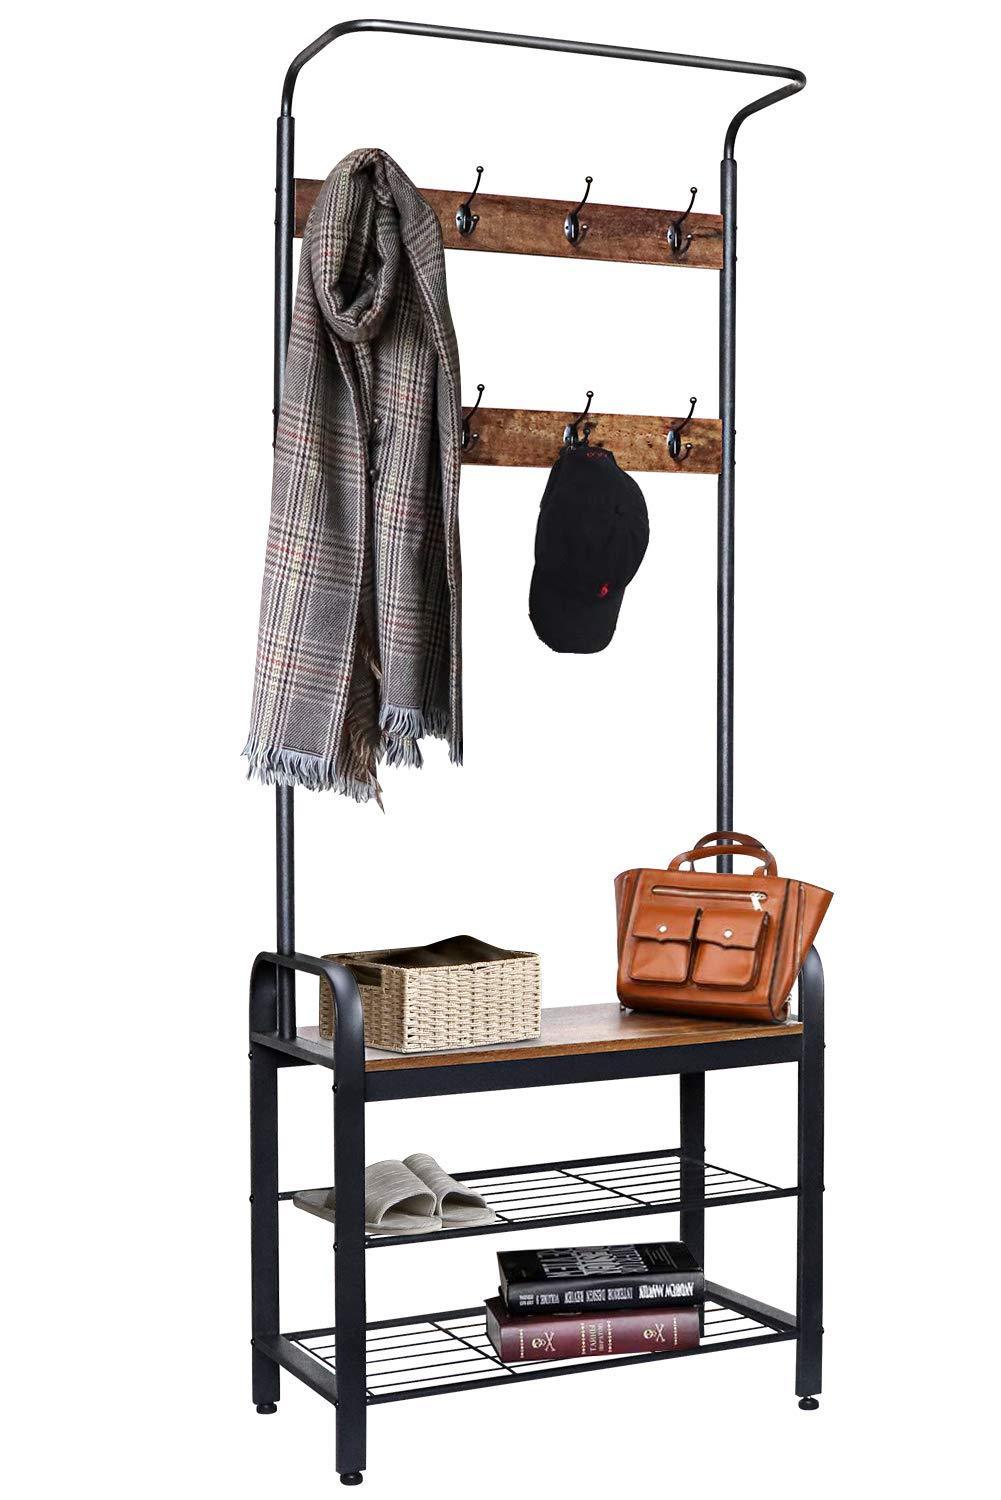 Order now zncmrr entryway hall tree with shoe bench rustic coat rack industrial entryway furniture organizer with 8 double hooks and storage shelf for hallway bedroom living room easy assembly